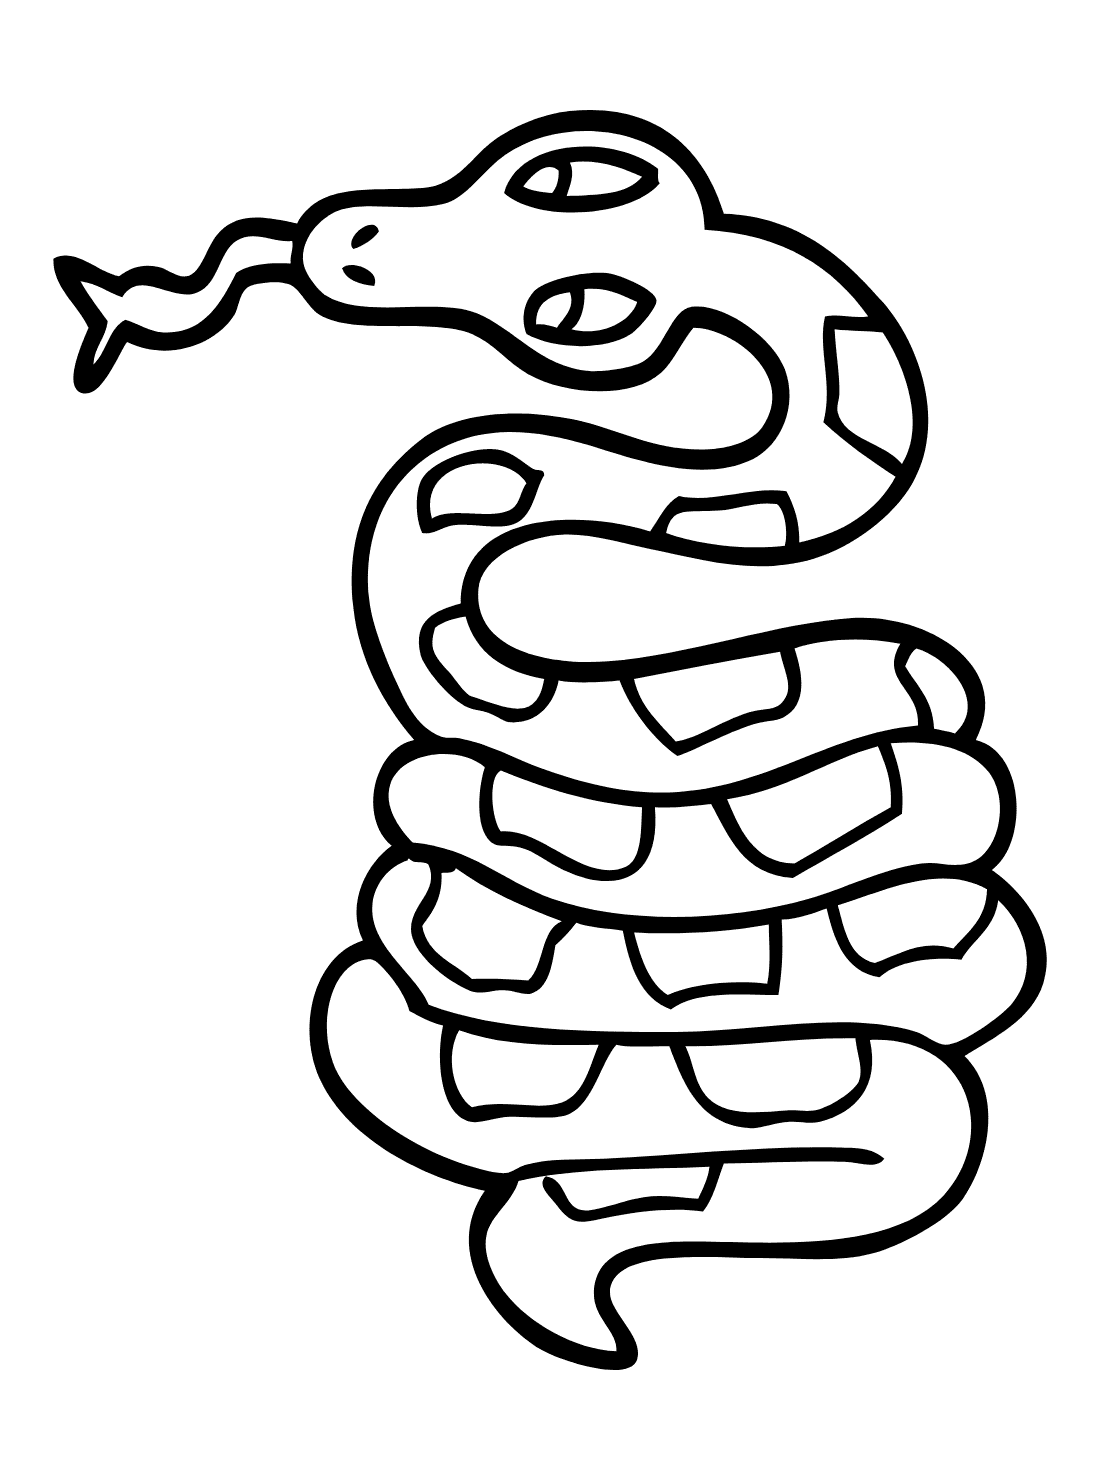 Printable coloring pages of snakes